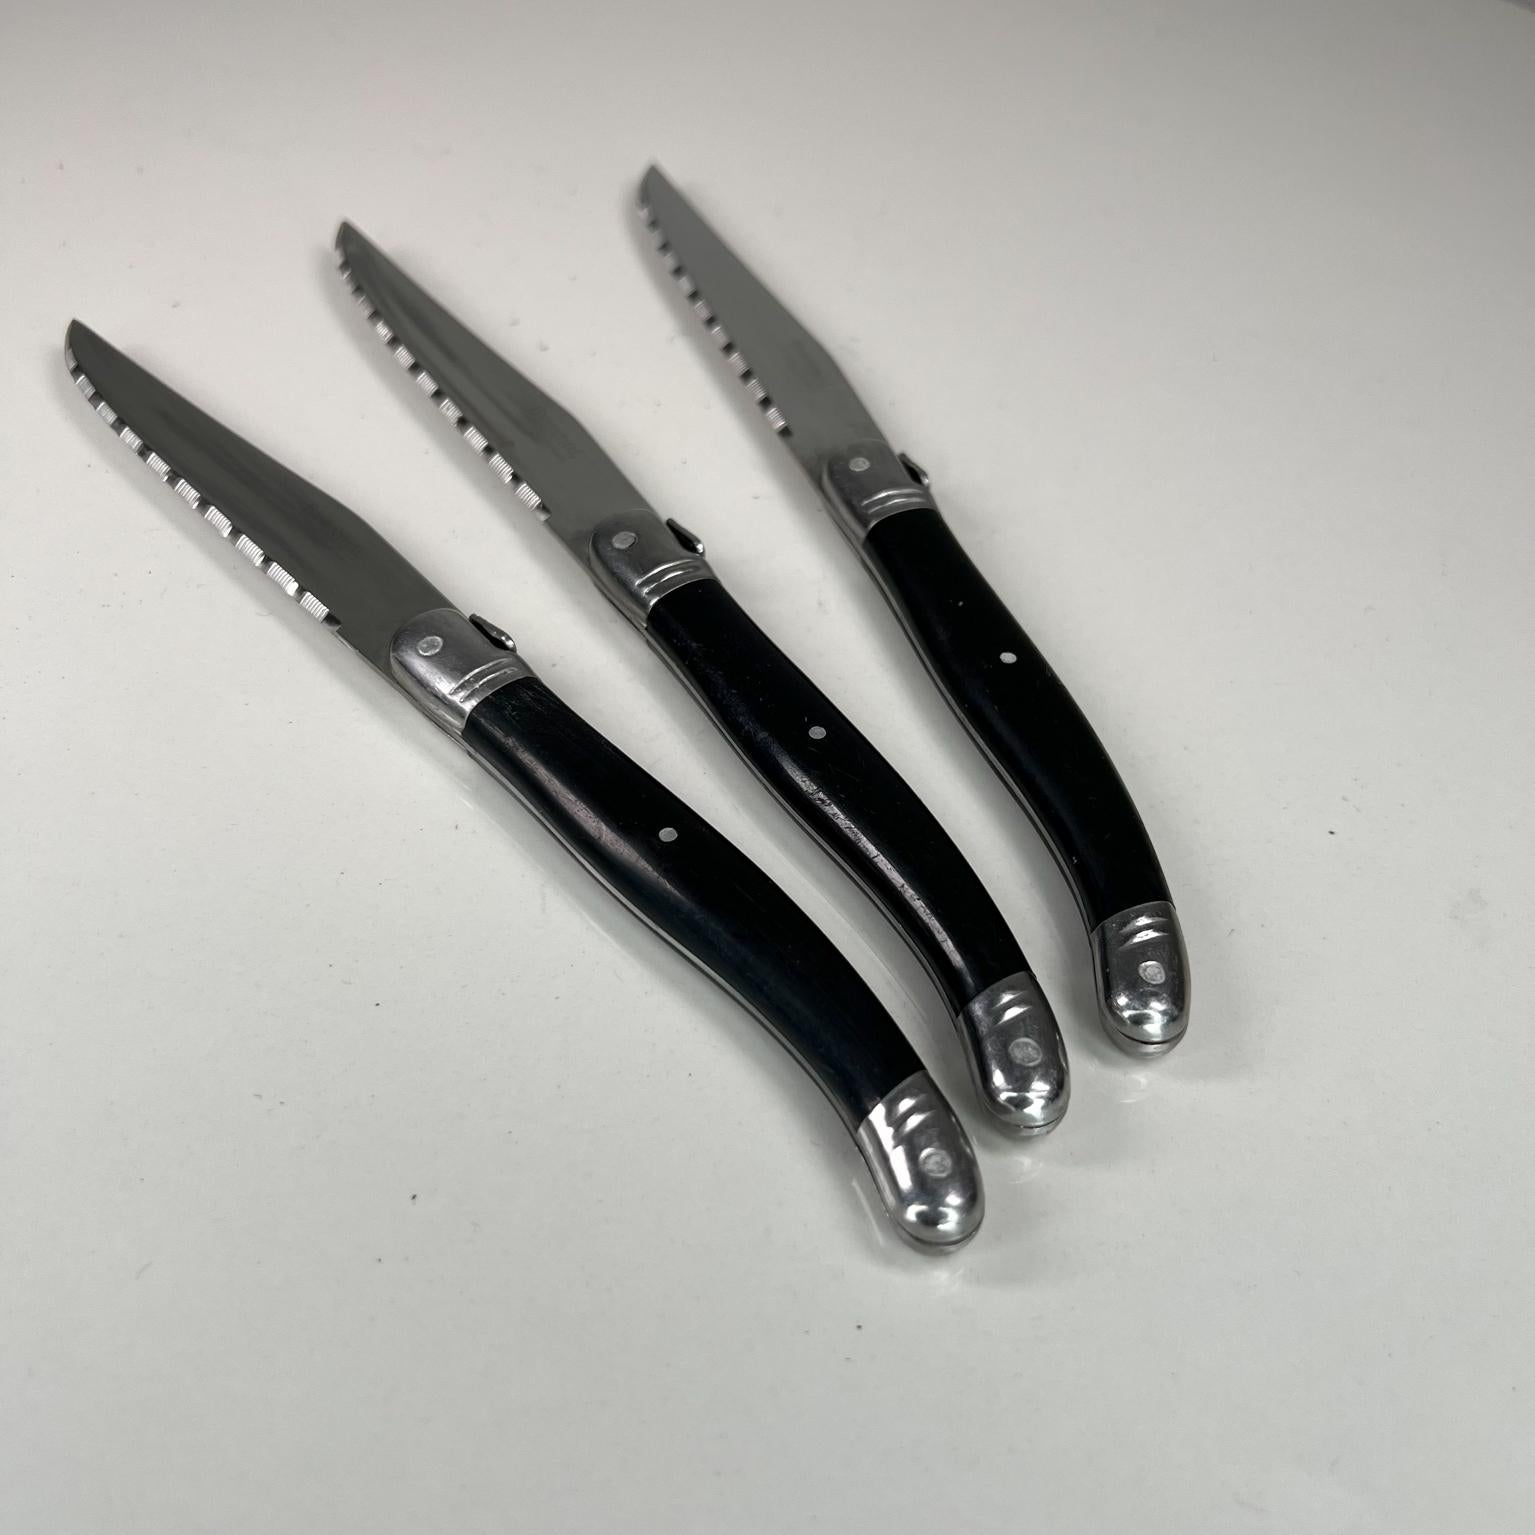 Laguiole Barenthal stainless black flatware 3 knives Jean Dubost L'Artet La Table France.
Stainless steel
9 long x .5 x .5
Preowned vintage condition.
See images please.
 